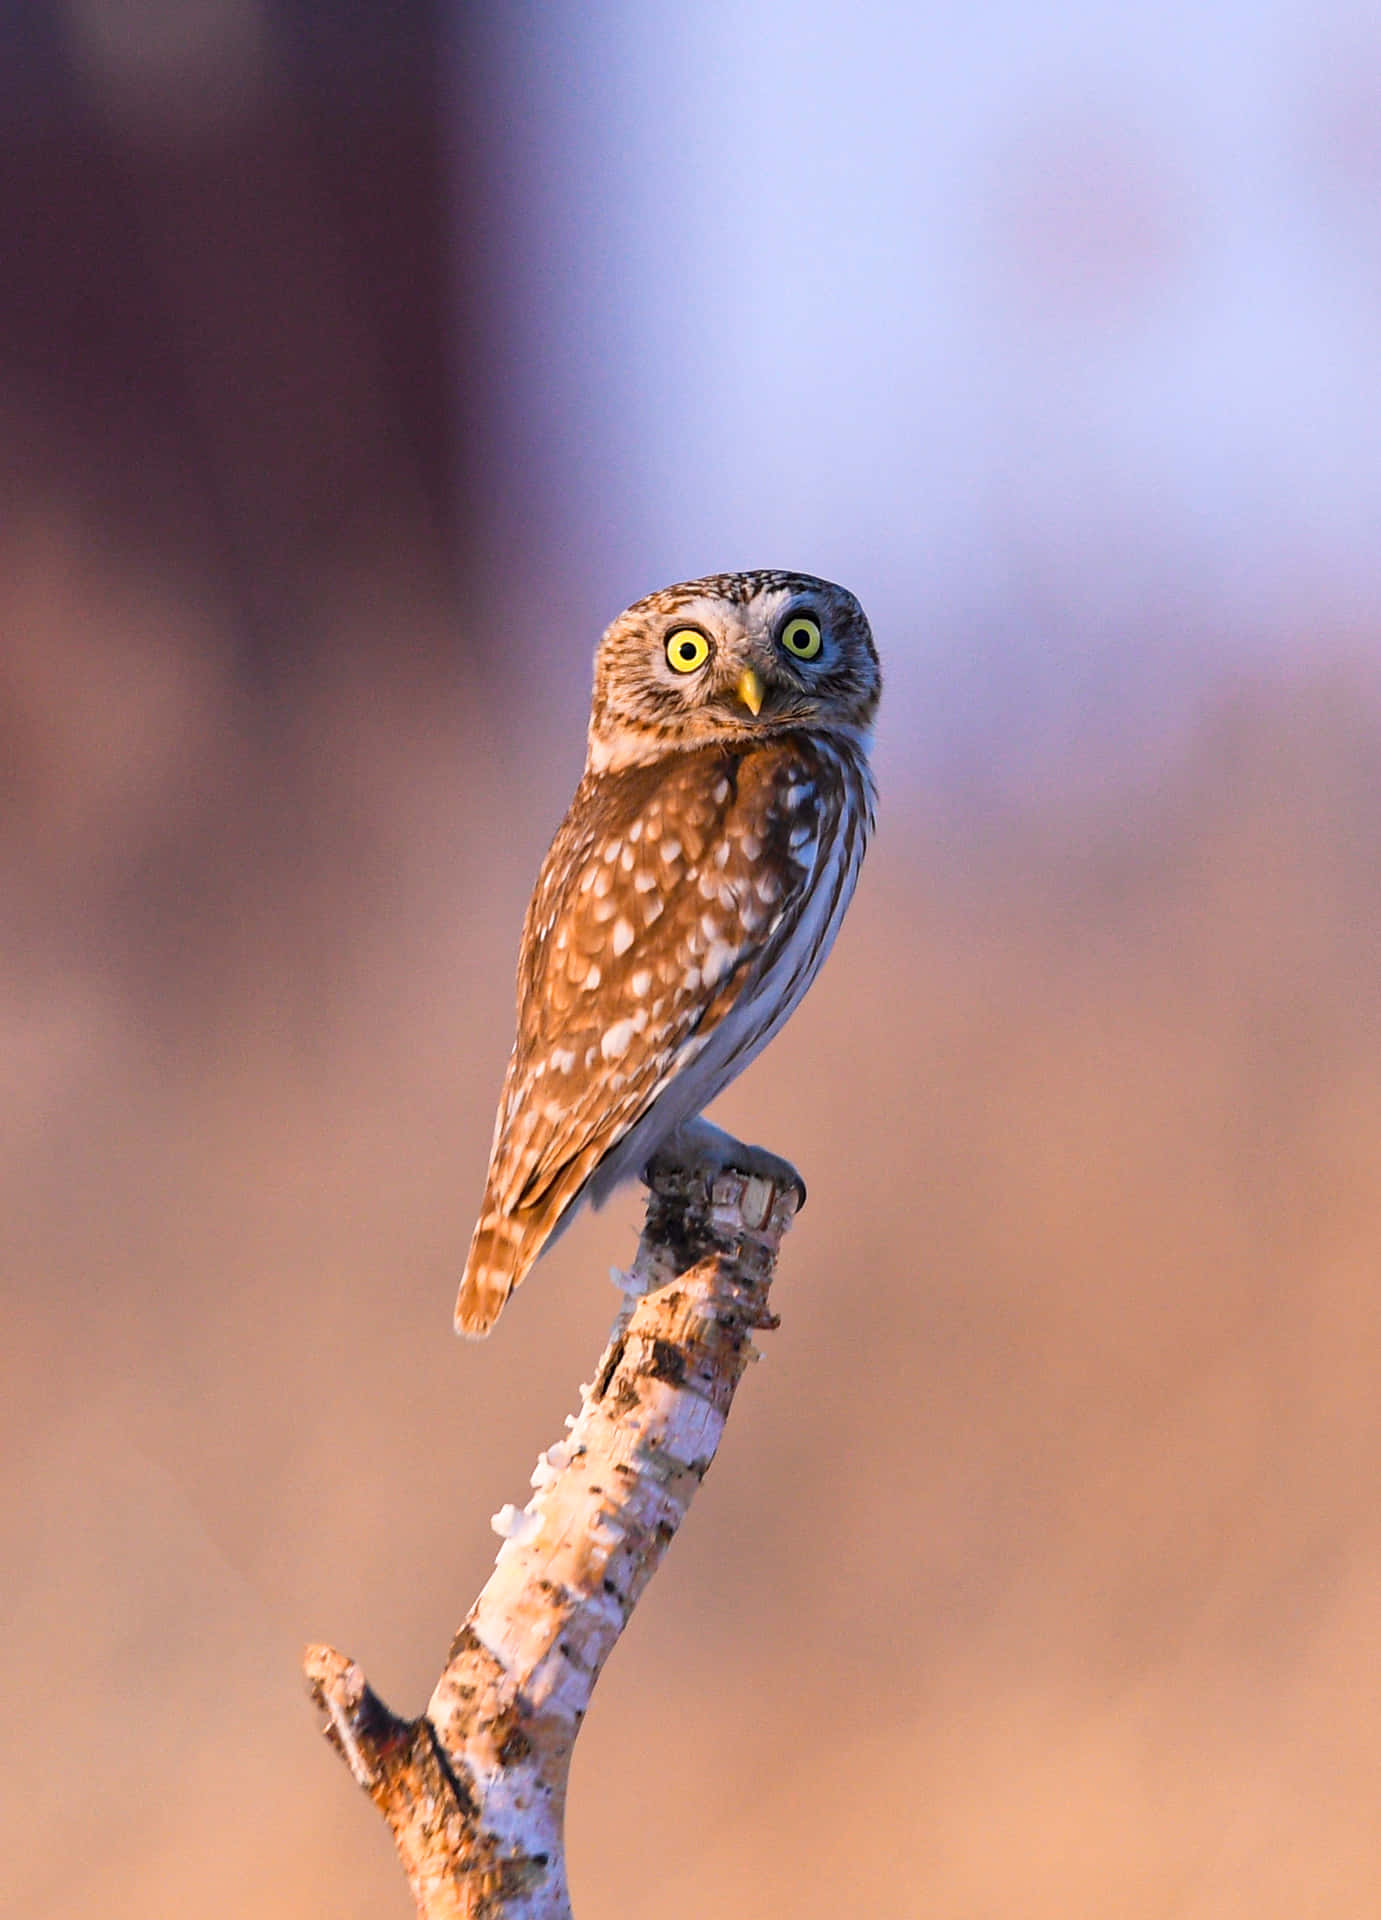 A wide-eyed owl, staring directly into the camera